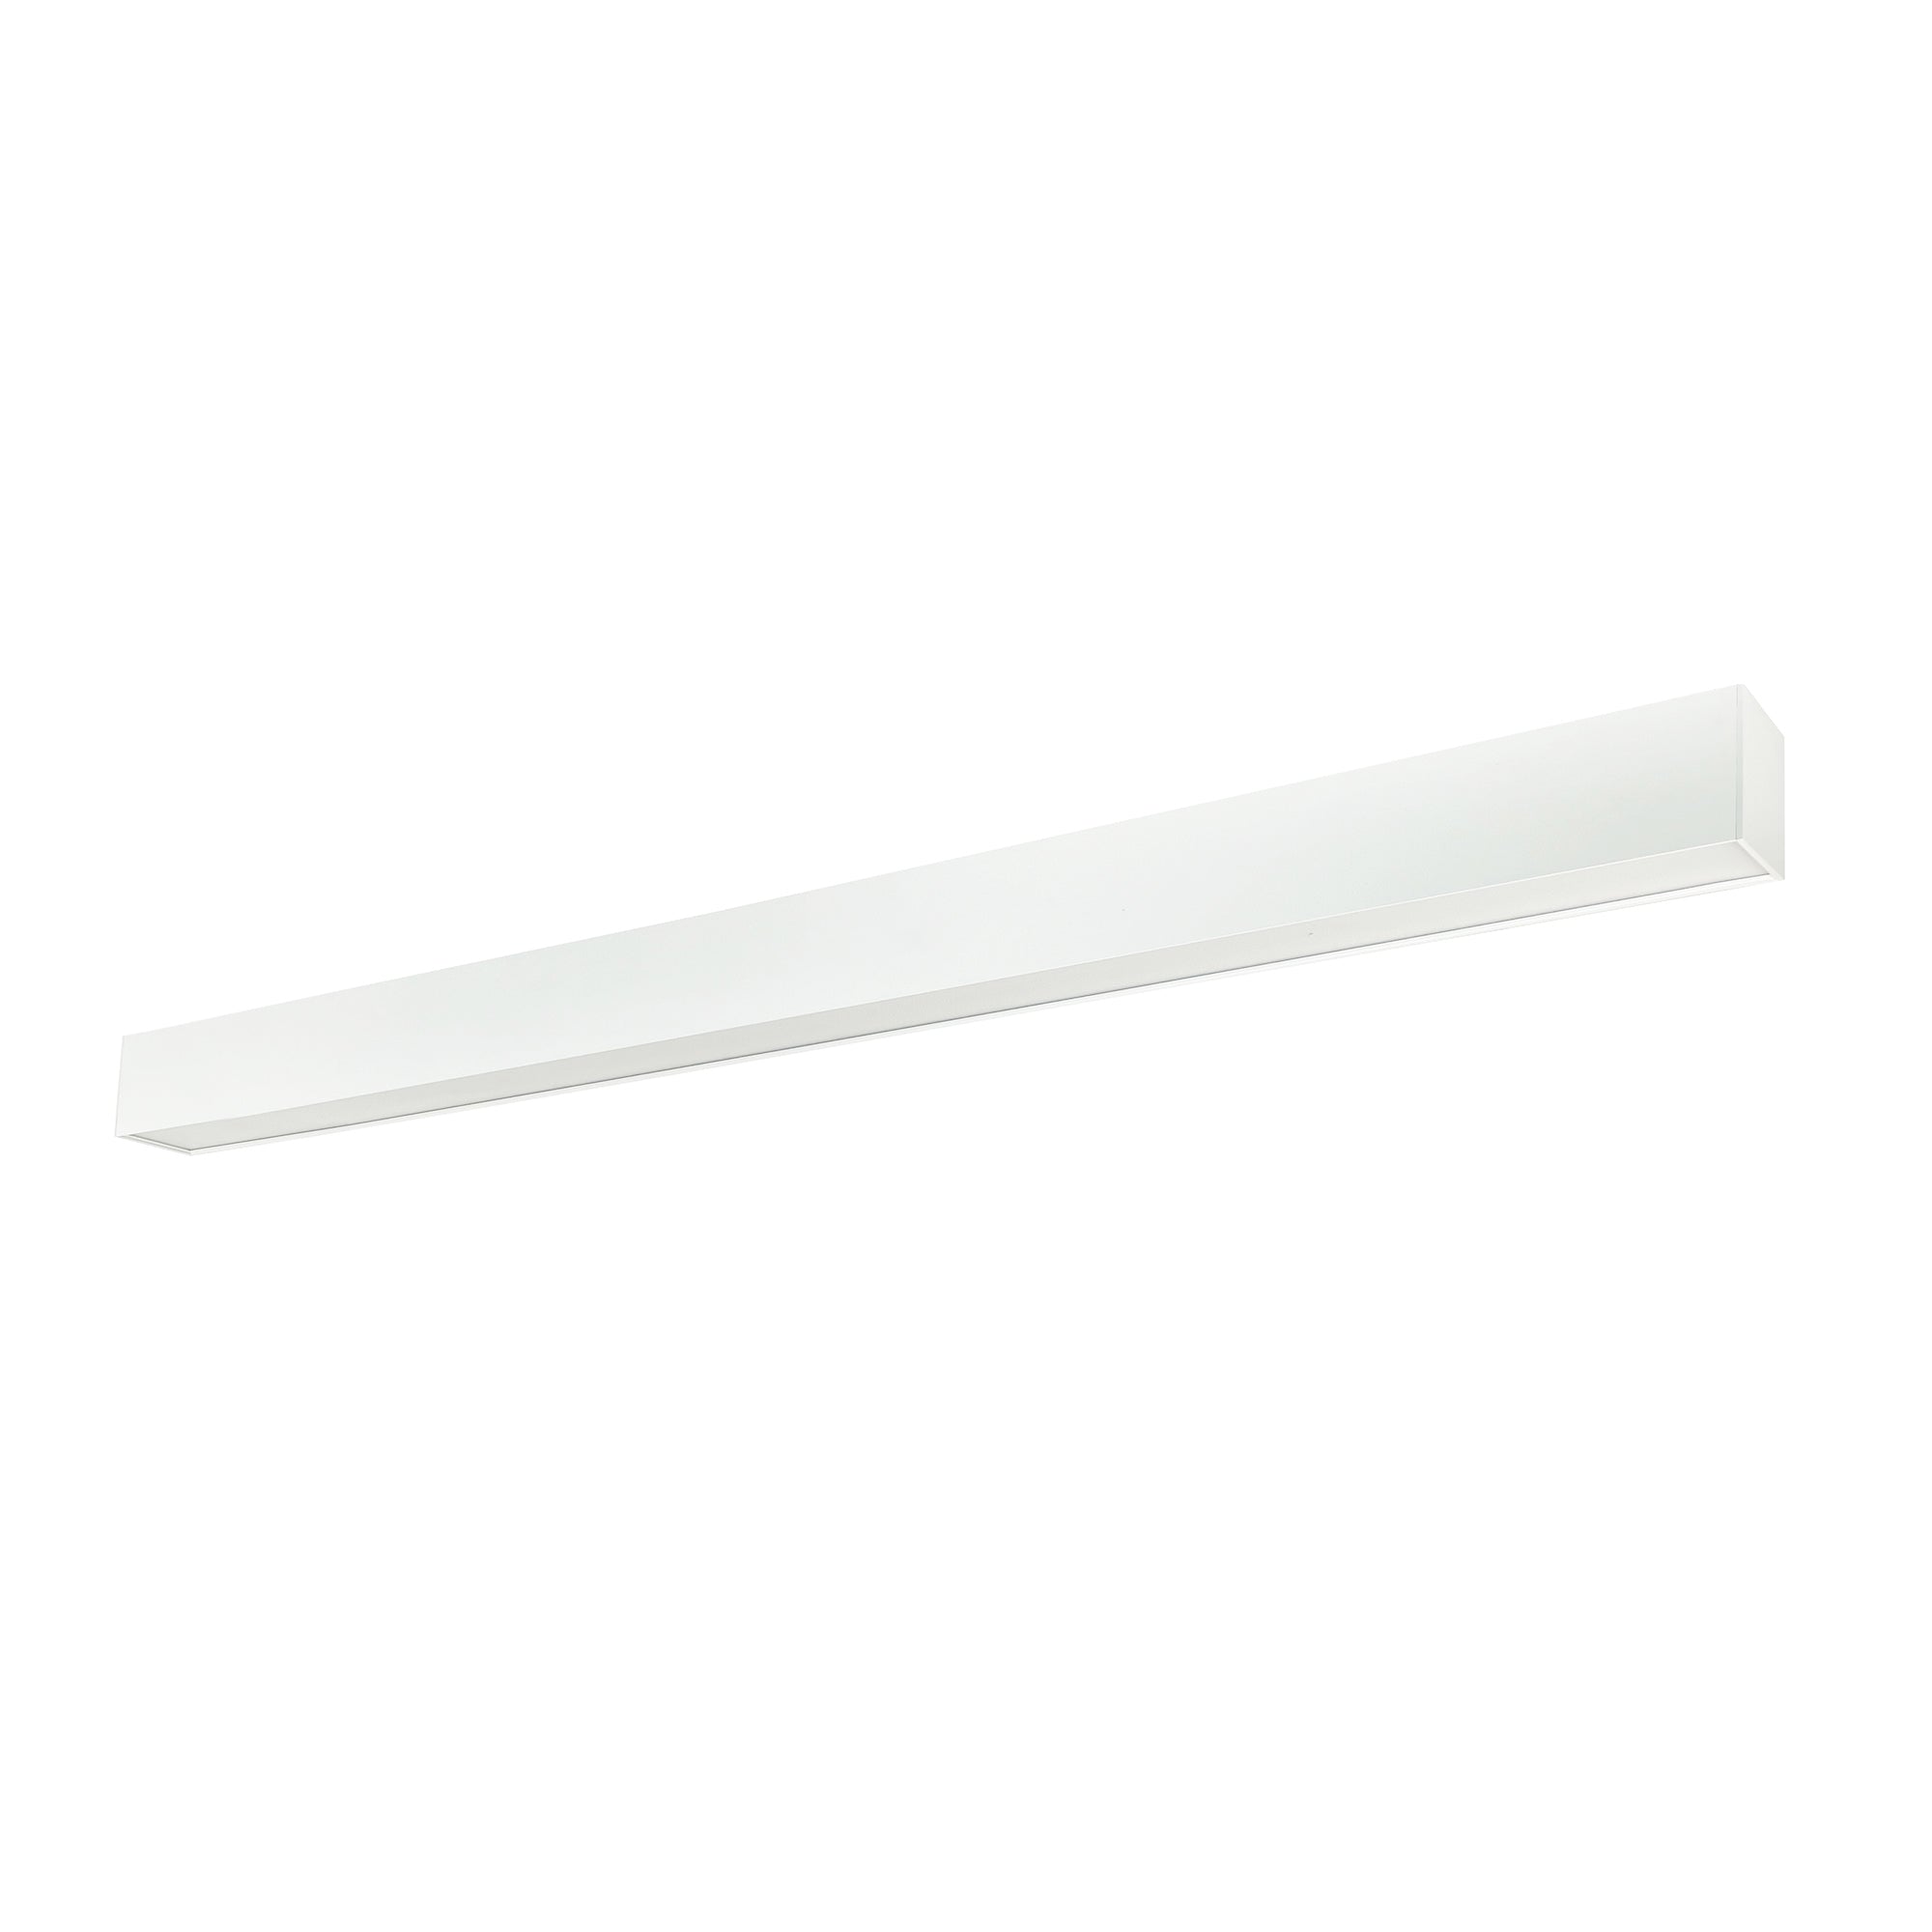 Nora Lighting NLUD-8334W/EM - Linear - 8' L-Line LED Indirect/Direct Linear, 12304lm / Selectable CCT, White Finish, with EM